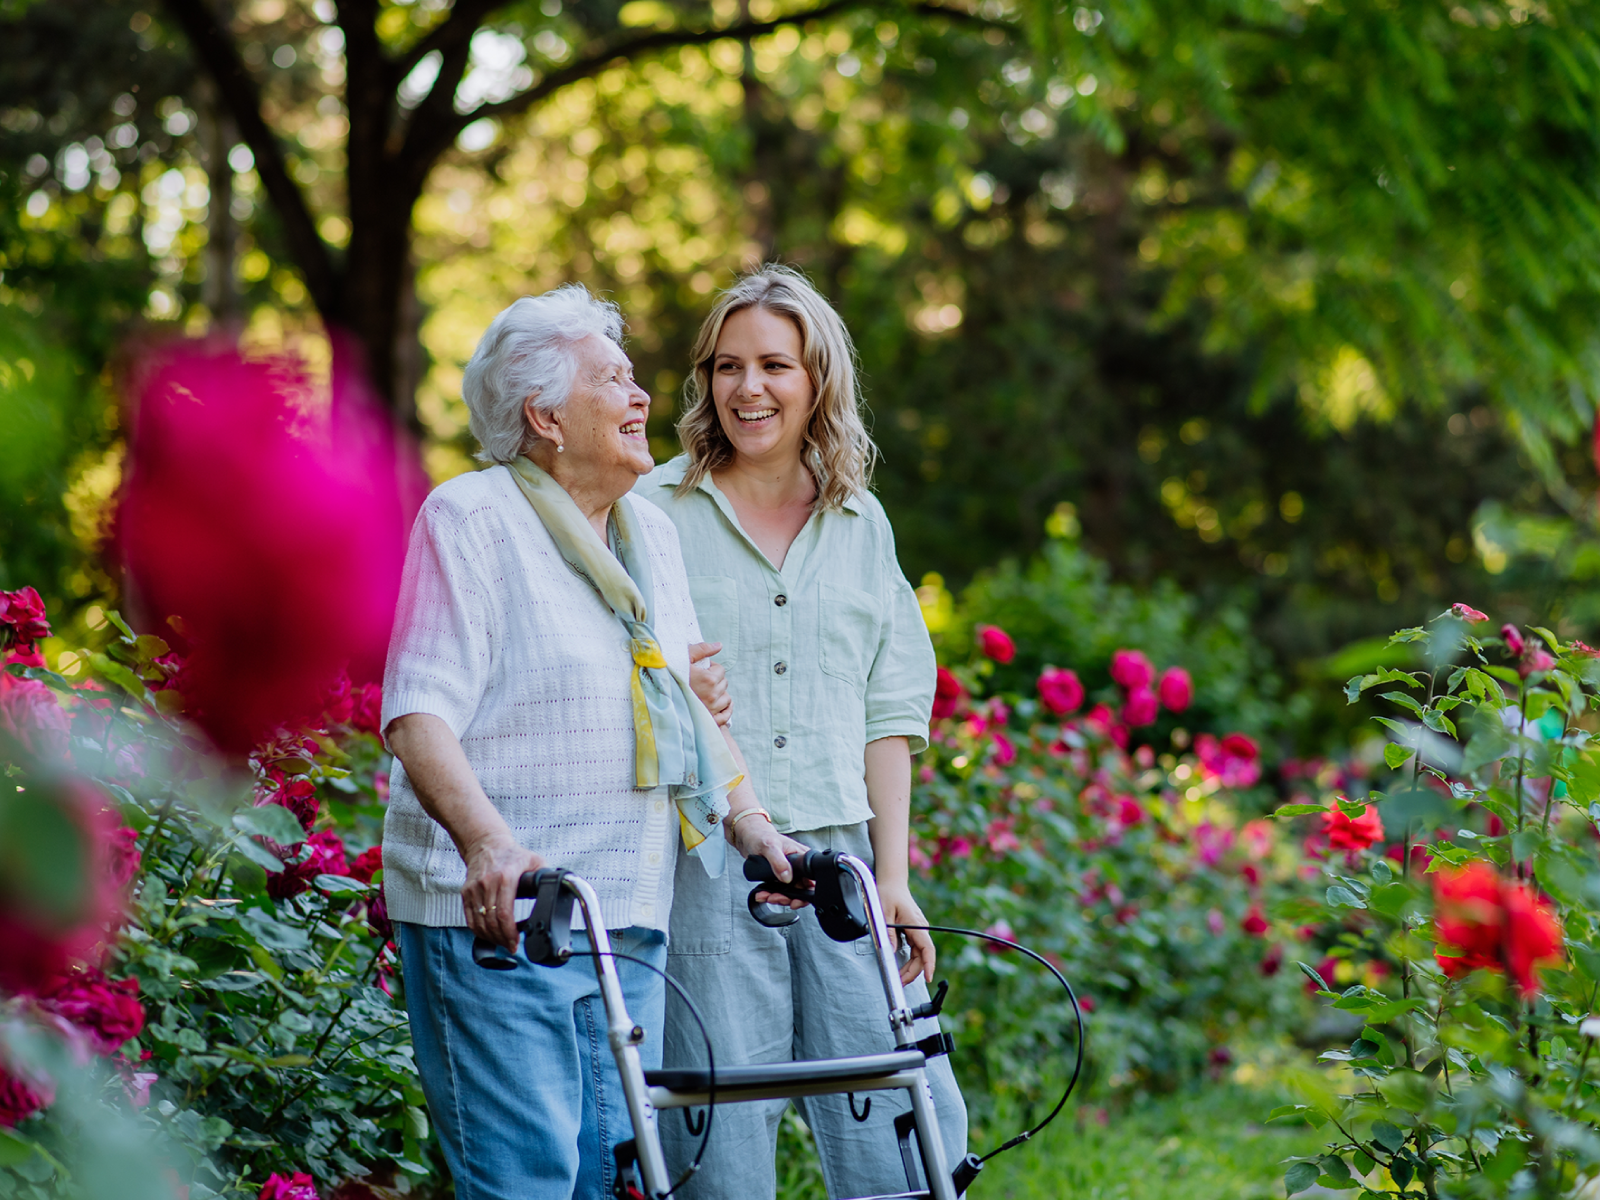 A woman and her elderly mother are walking through a garden with pink and red flowers. The mother is using a walker.